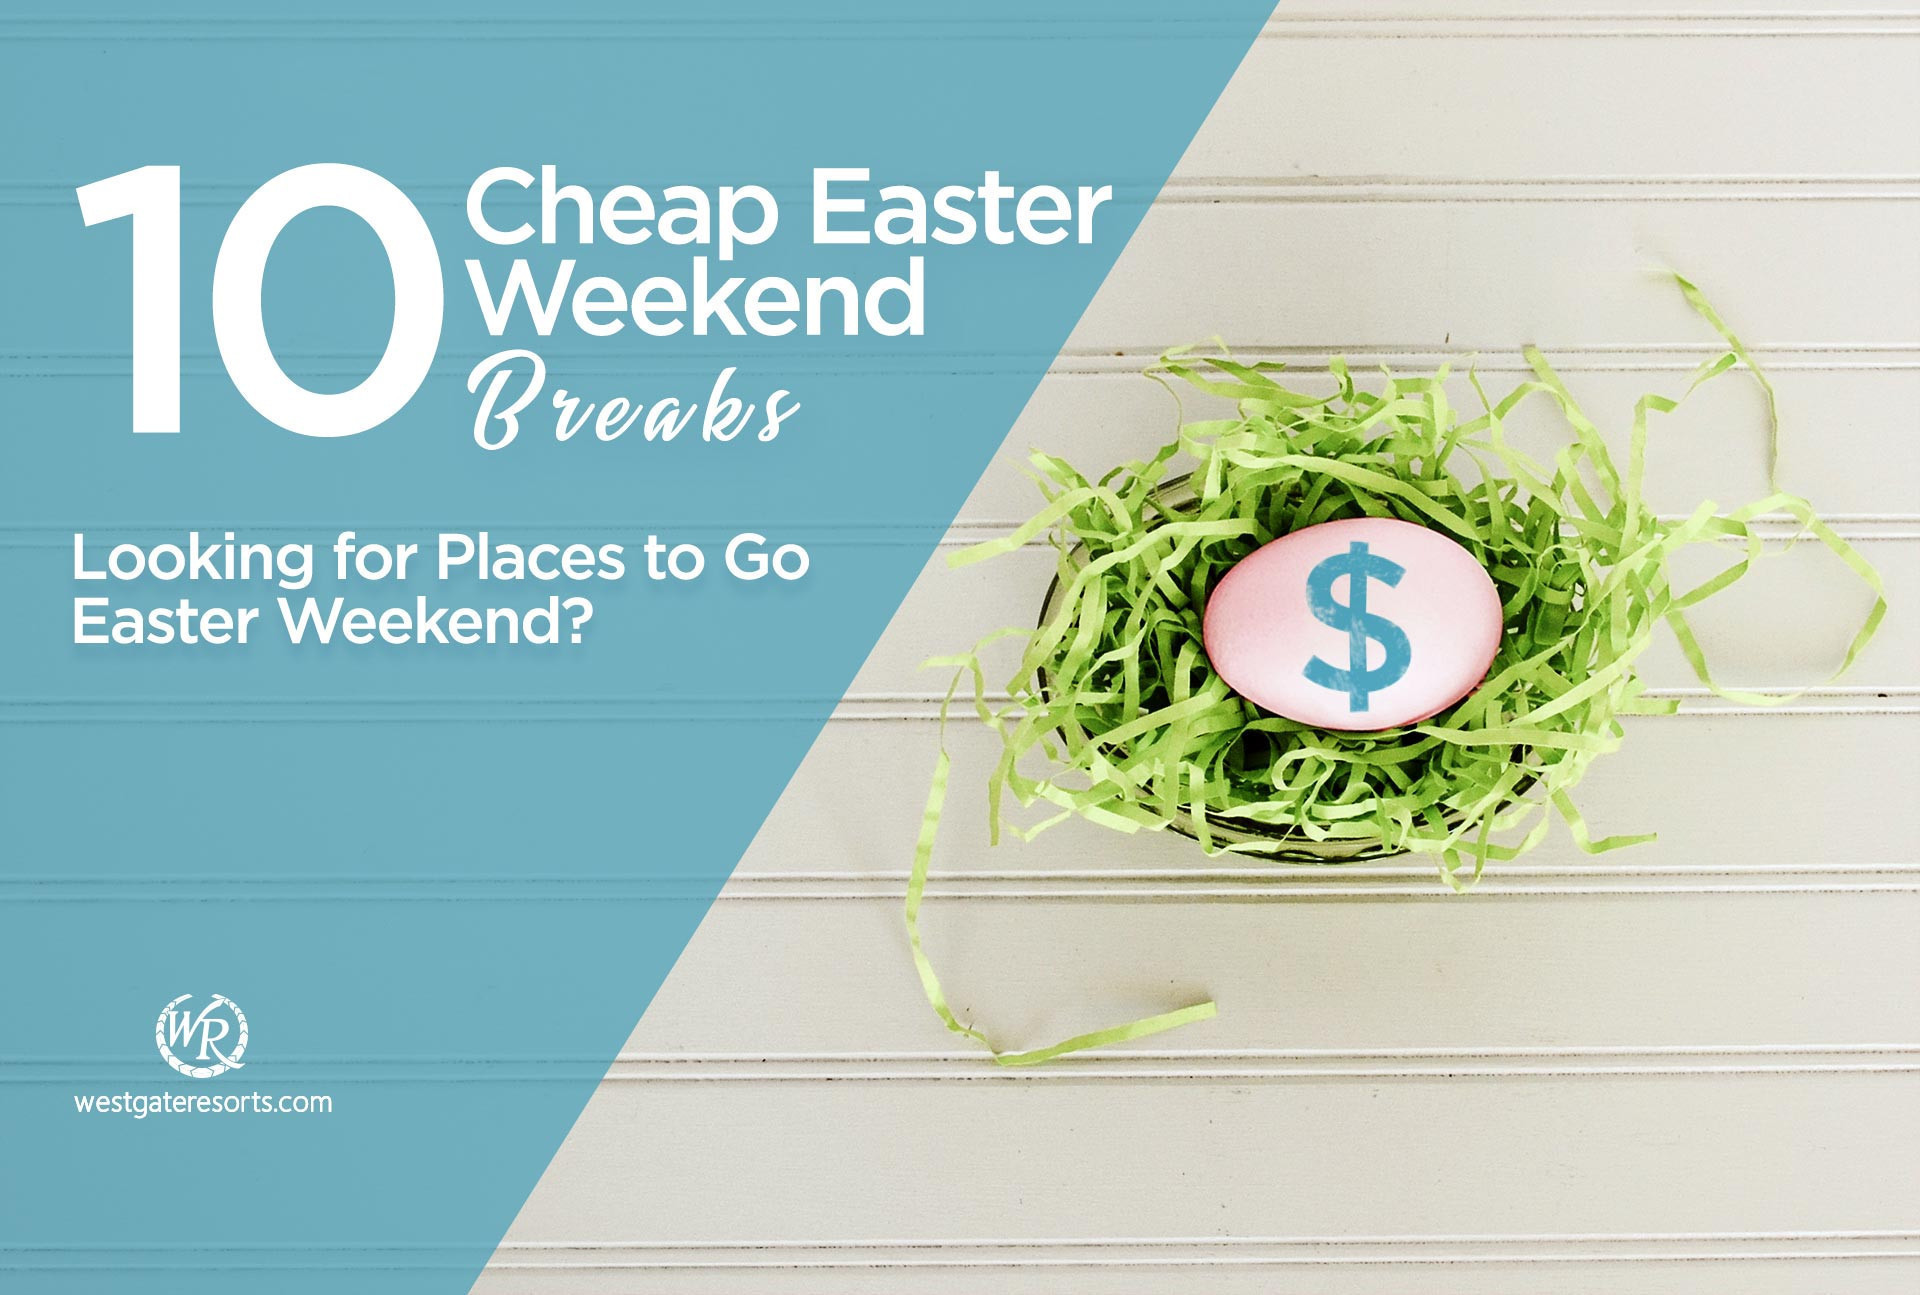 Looking for Places to Go Easter Weekend? 10 Cheap Easter Weekend Breaks